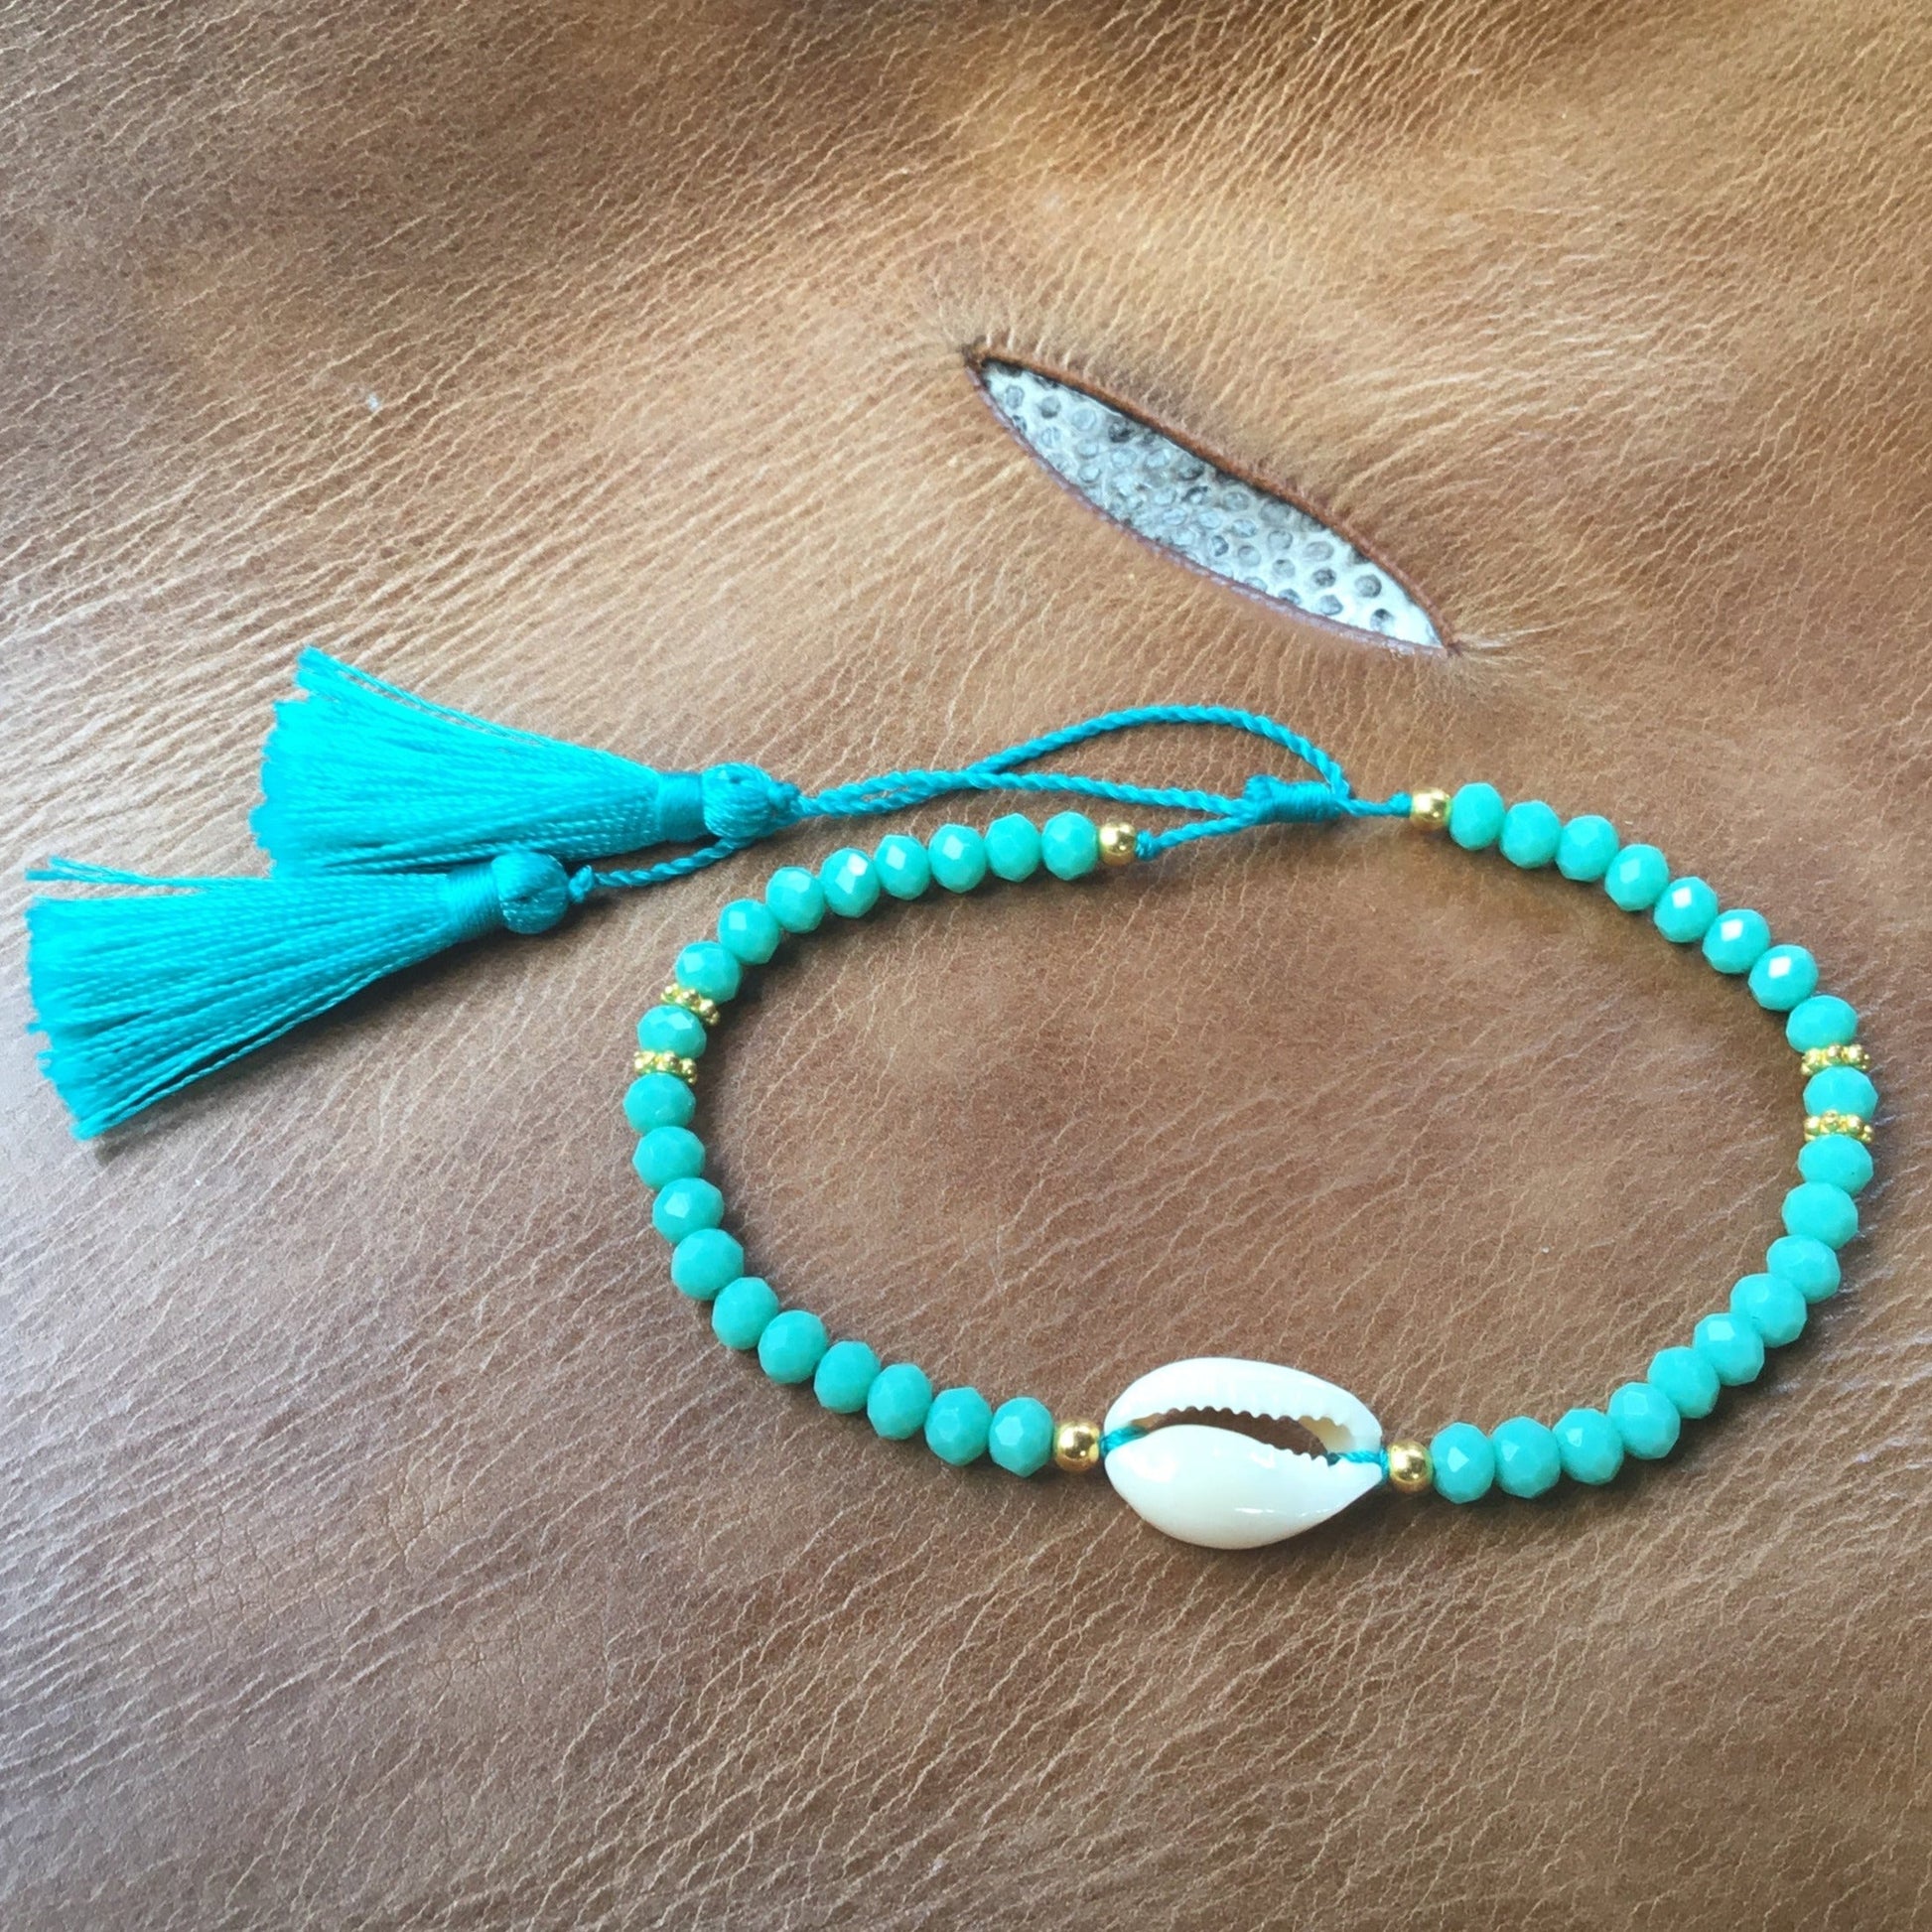 cowrie white shell and blue crystals, adjustable bracelet.